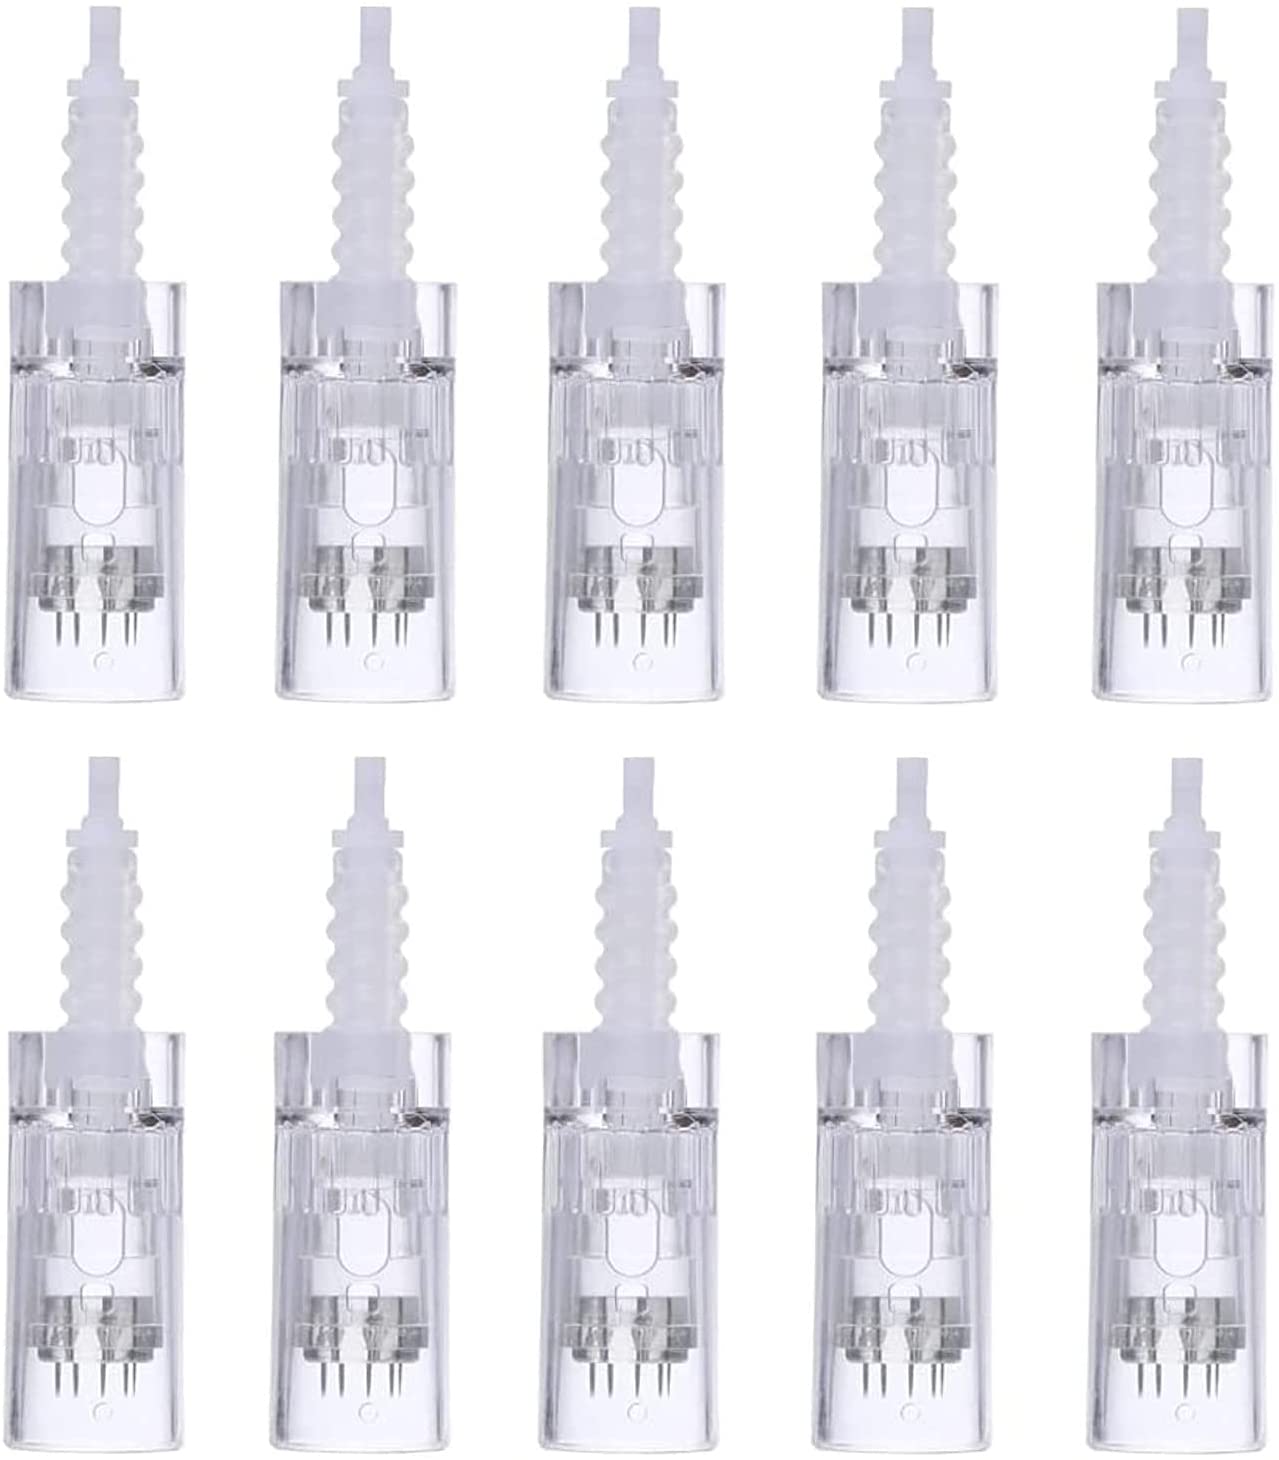 P-Beauty Cosmetic Accessories 36 Pin Needle Cartridges Replacement Needle Cartridges for Car Derma Electric Pen Microneedling Bayonet Closure for Dermapen Devices with Bayonet Port Pack of 10 (36 Pins)